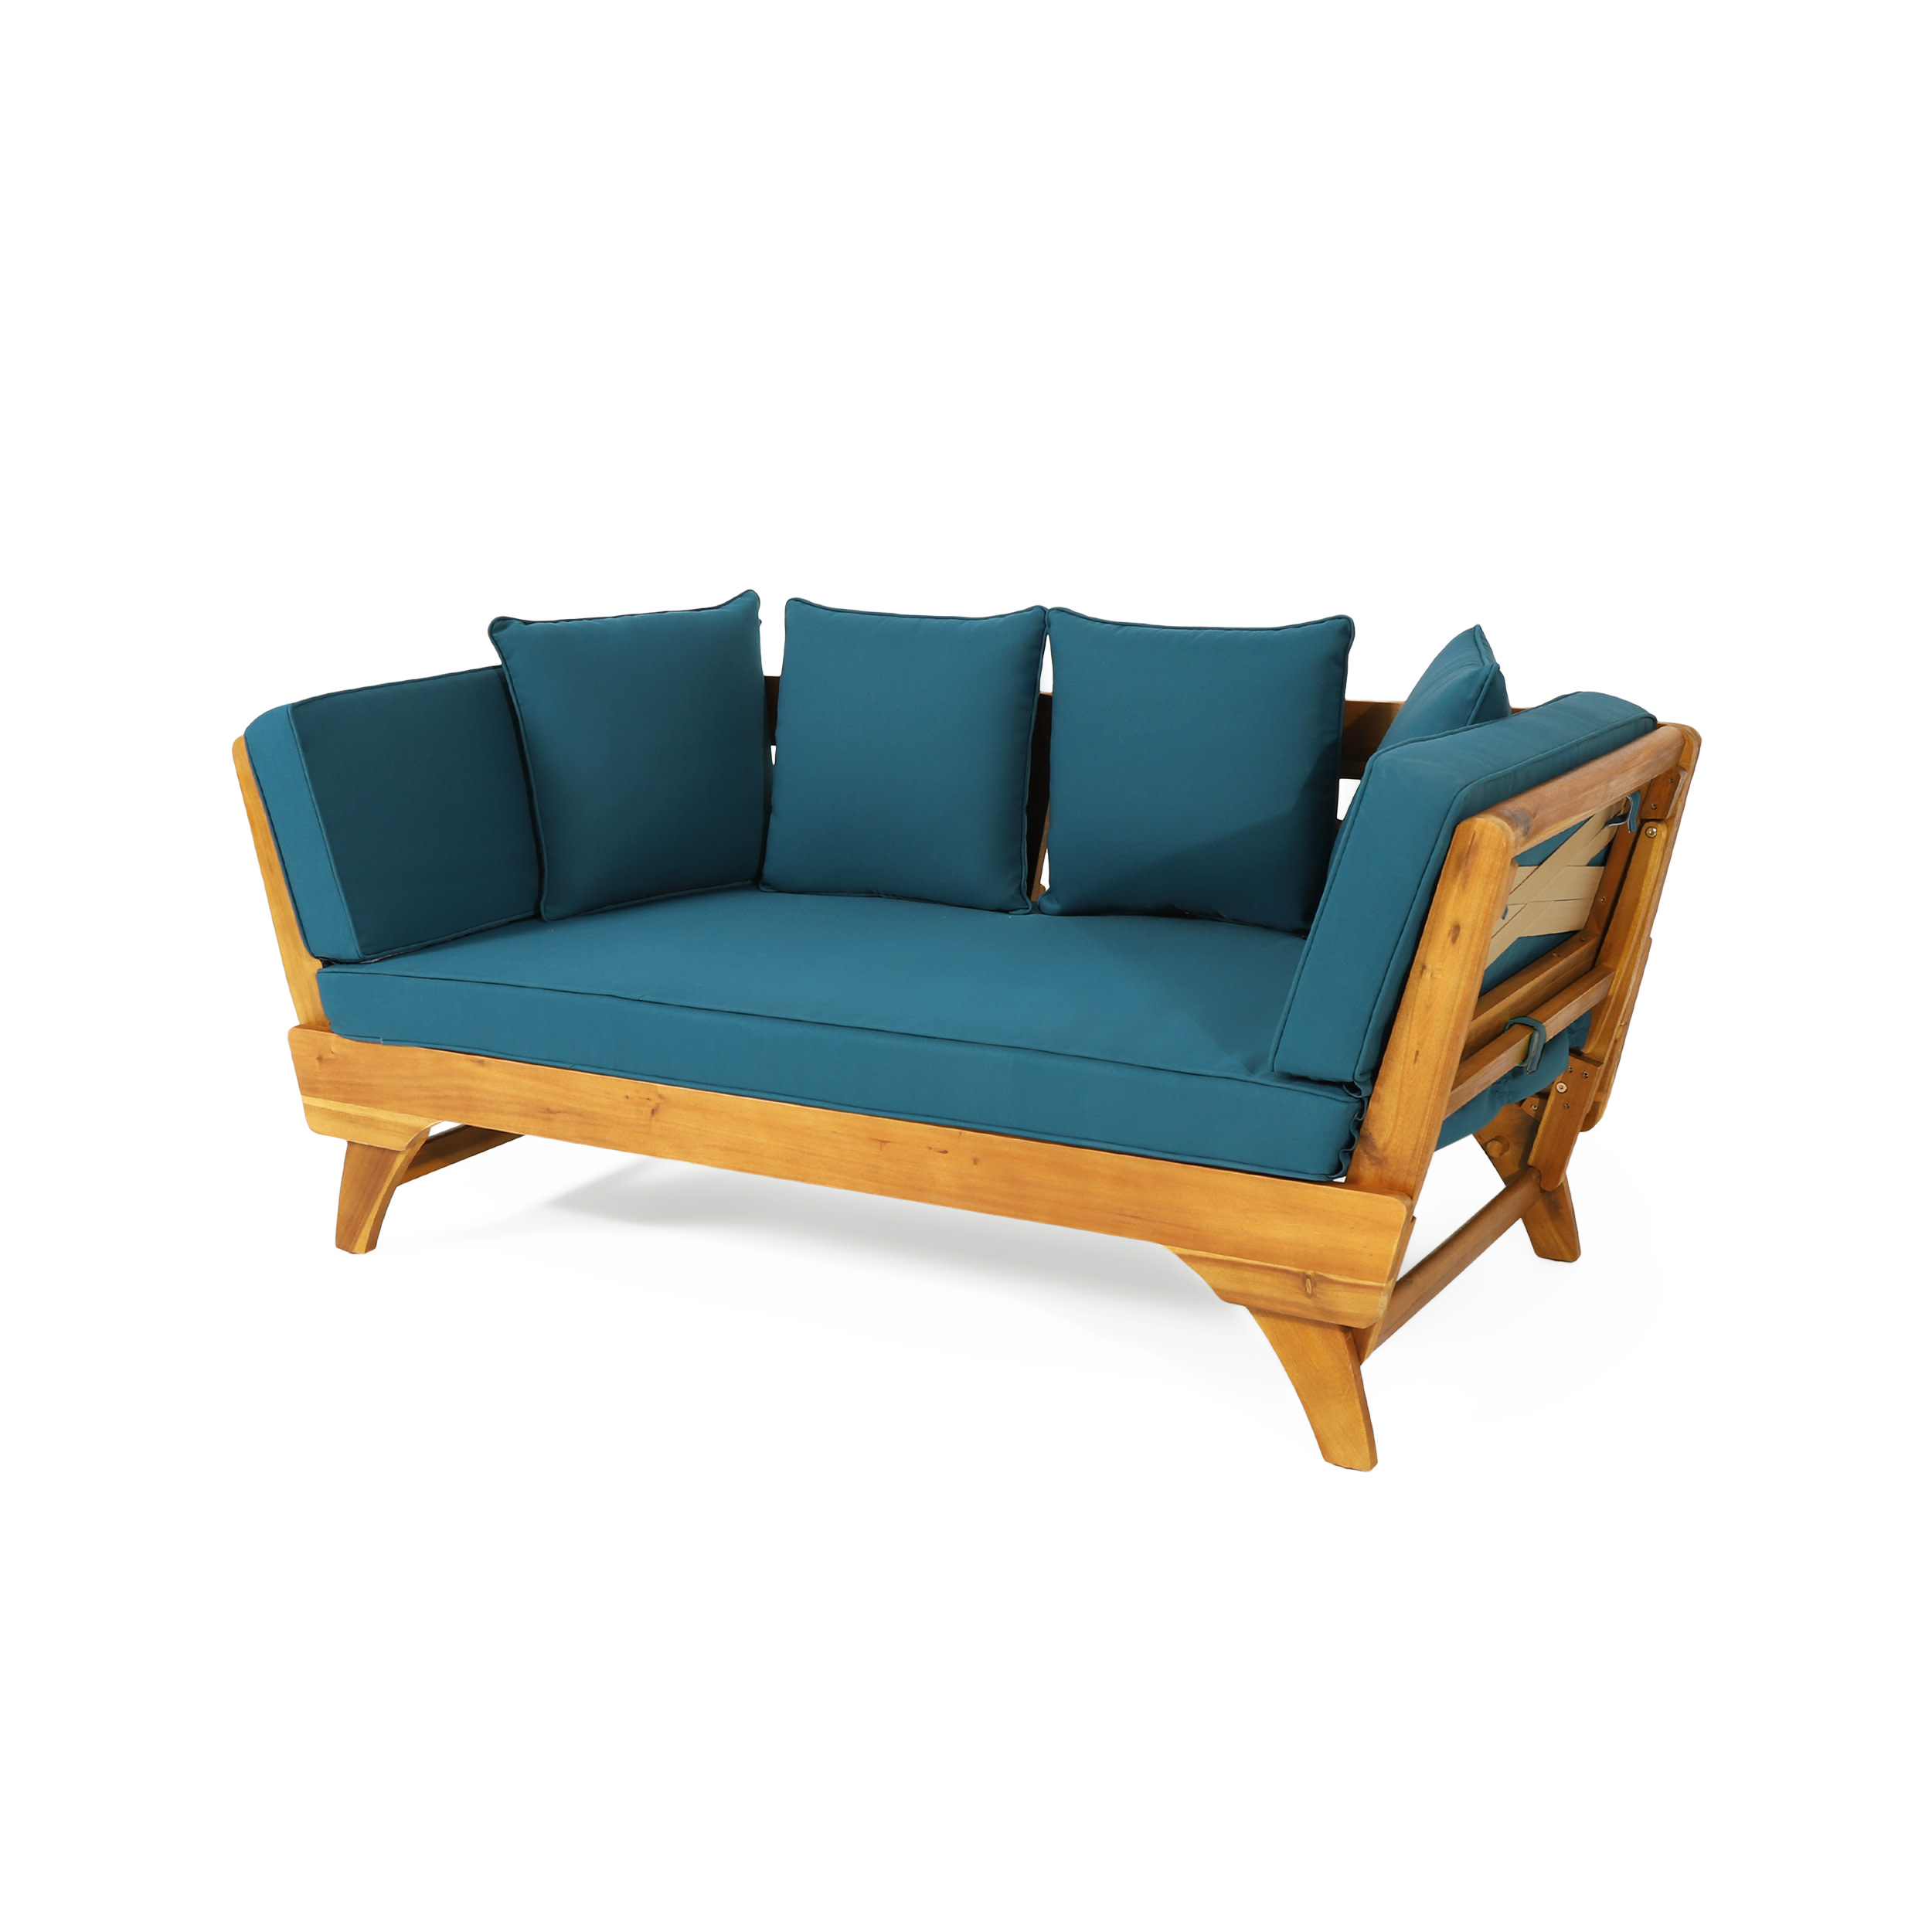 Finleigh Acacia Wood Outdoor Expandable Daybed with Cushions, Teak, Dark Teal, and Khaki - image 2 of 8